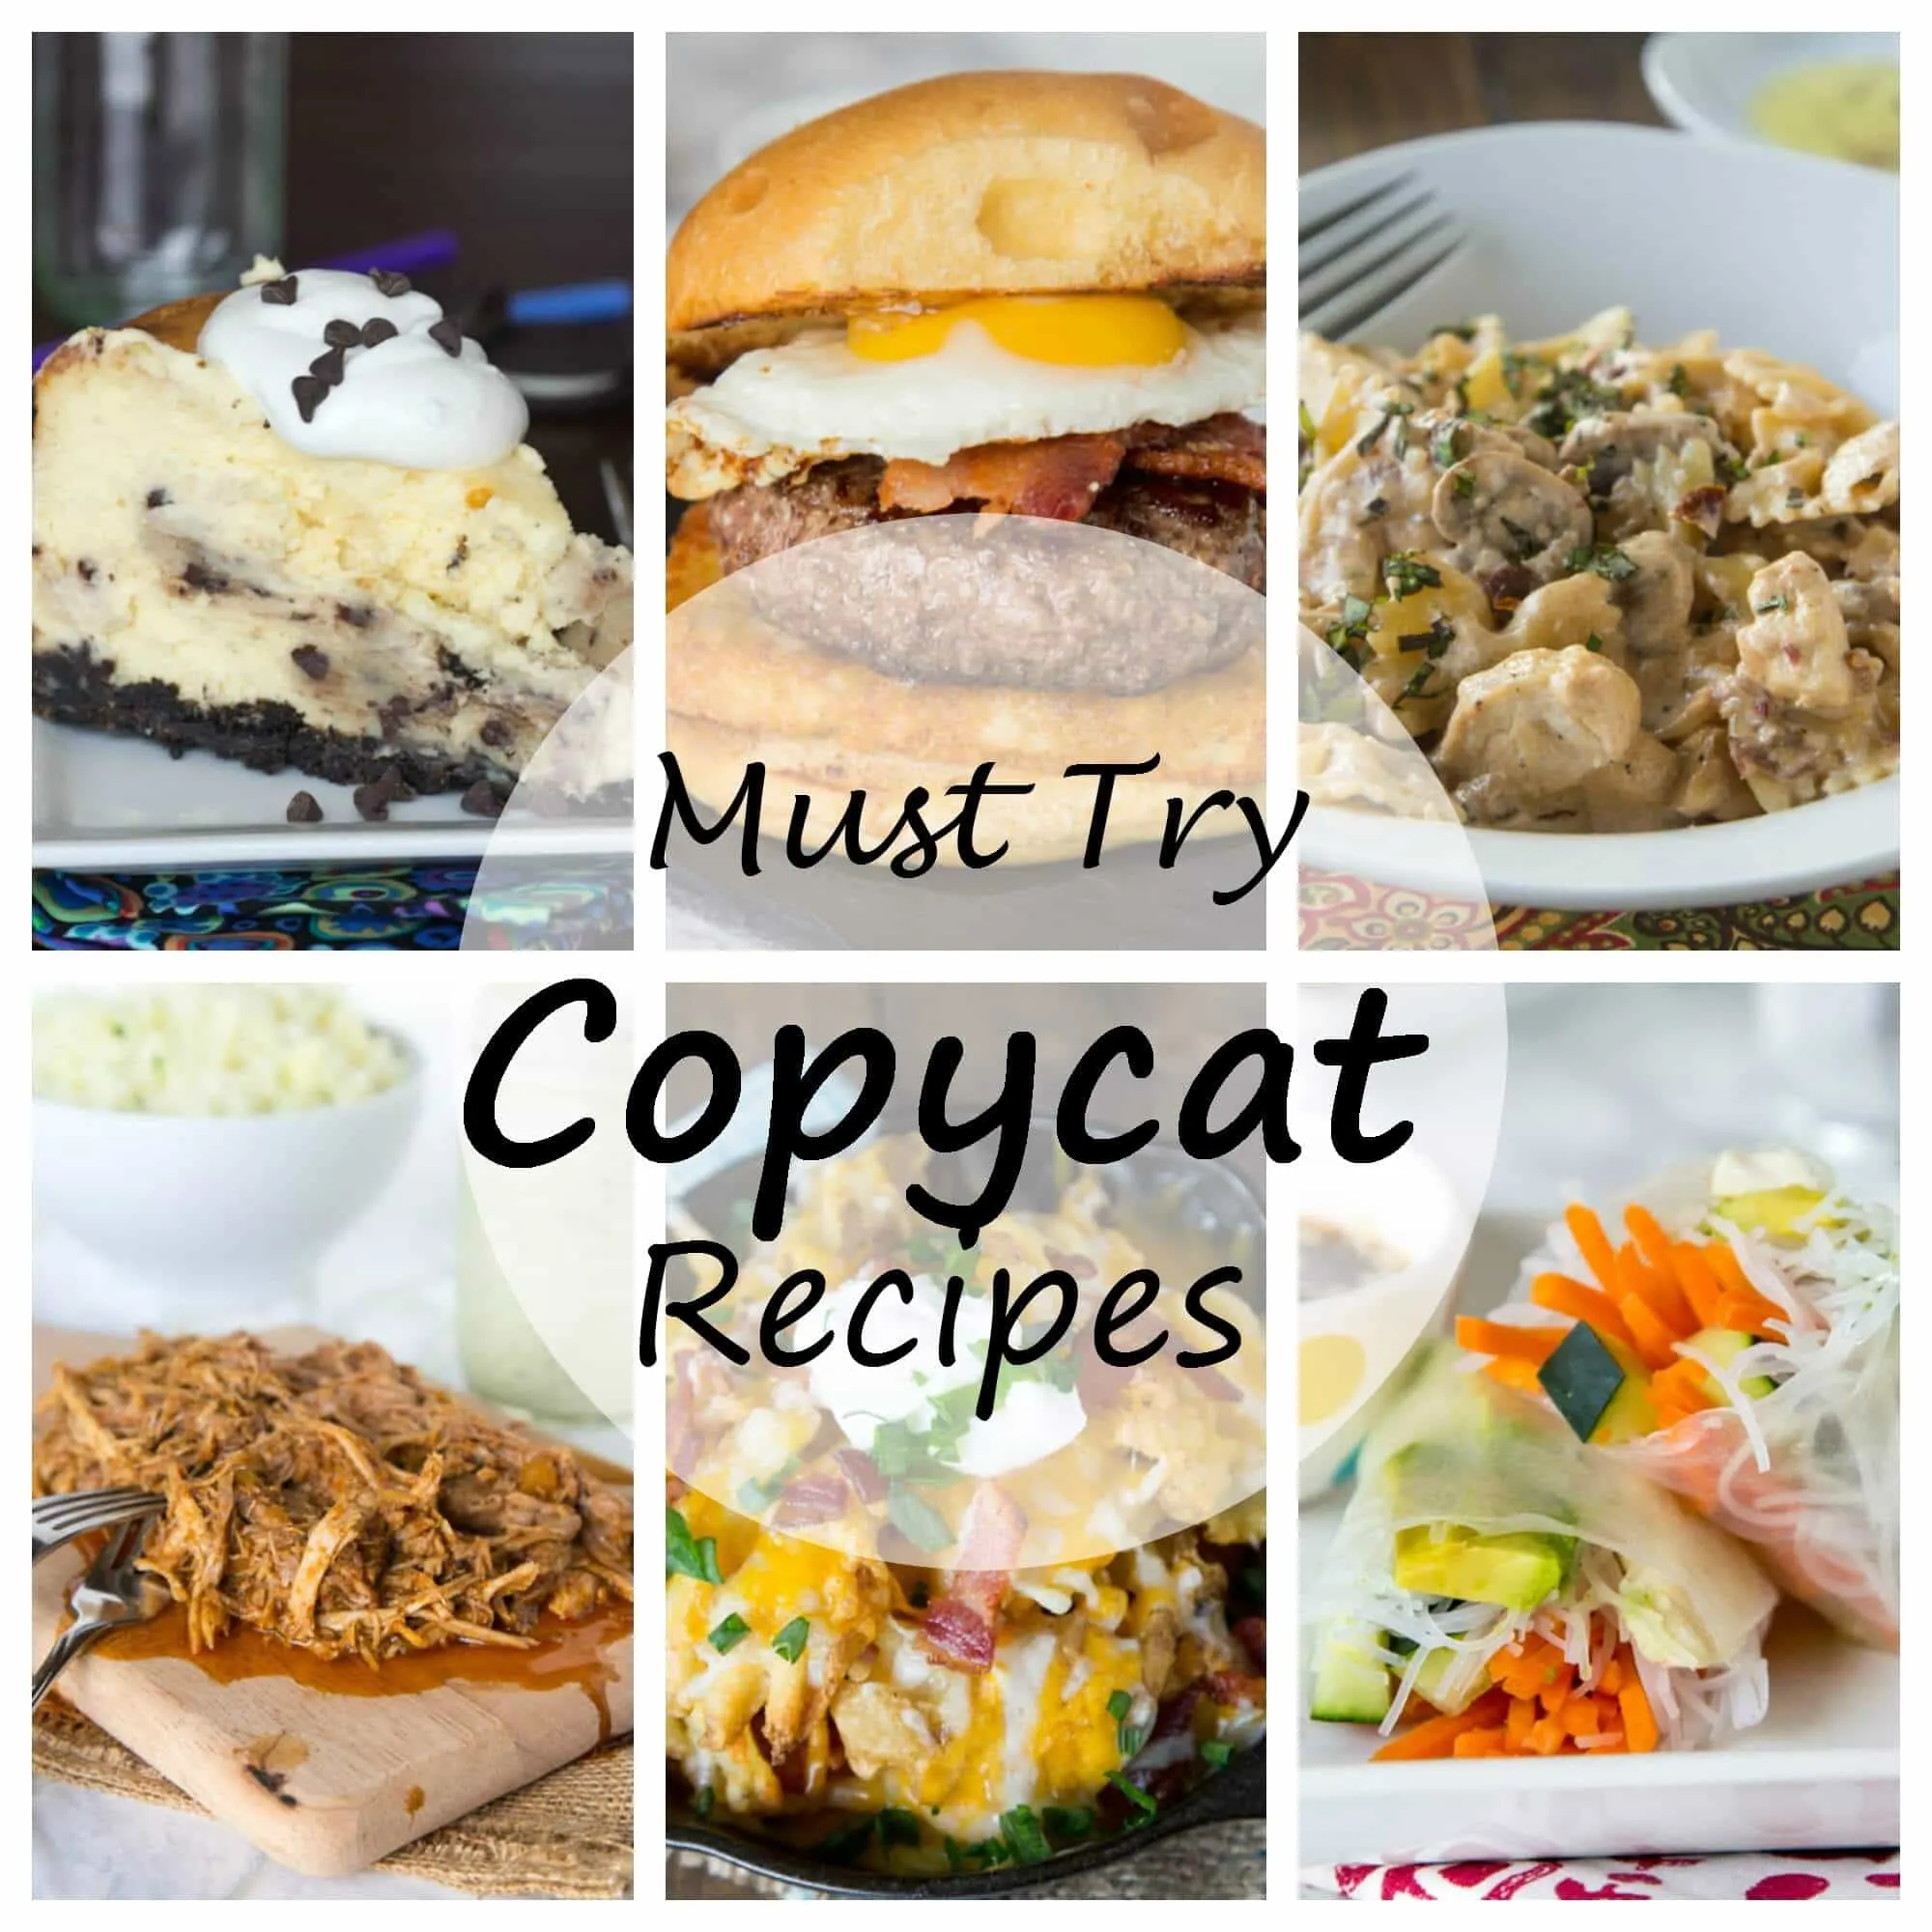 15 Copycat Recipe to Try - want to make some of your restaurant favorites at home? Here are 15 homemade versions of some famous restaurant dishes!